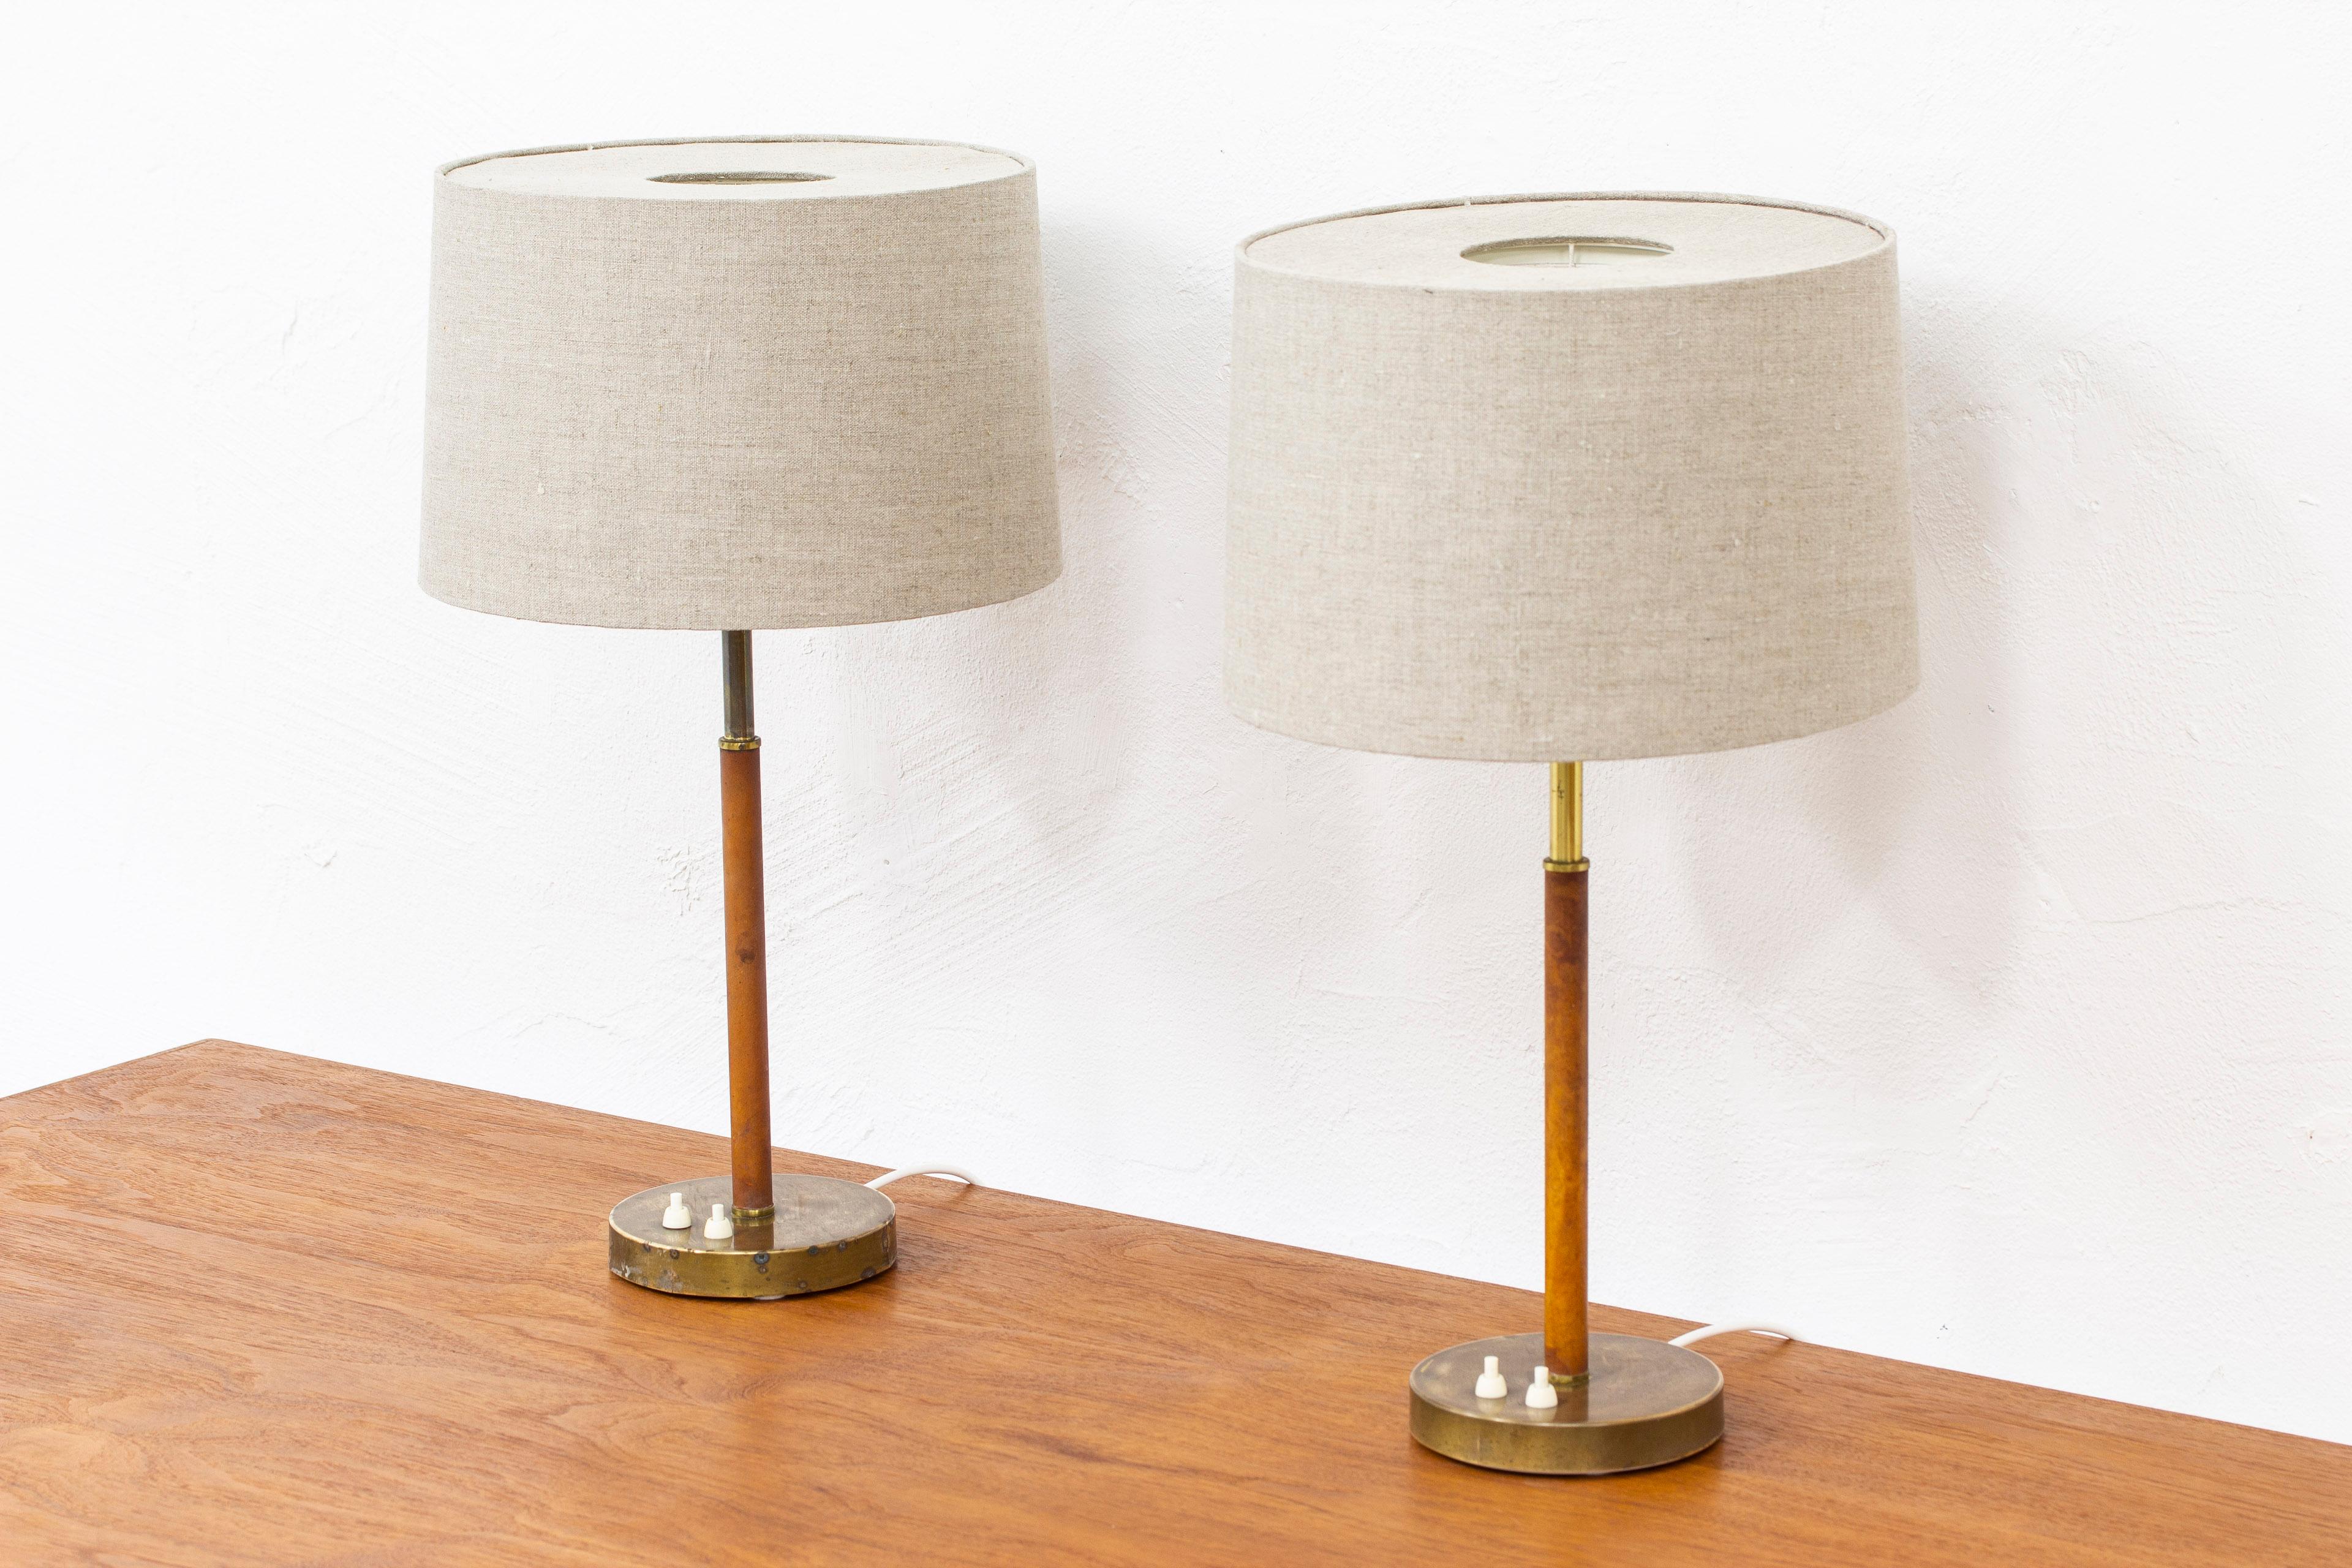 Pair of table lamps model 2043 designed by Bertil Brisborg & Åke Hultgren. Produced in Sweden by Nordiska Kompaniet during the 1950s. Made from brass, white lacquered metal and with original cognac colored leather. The original lamp shades have been